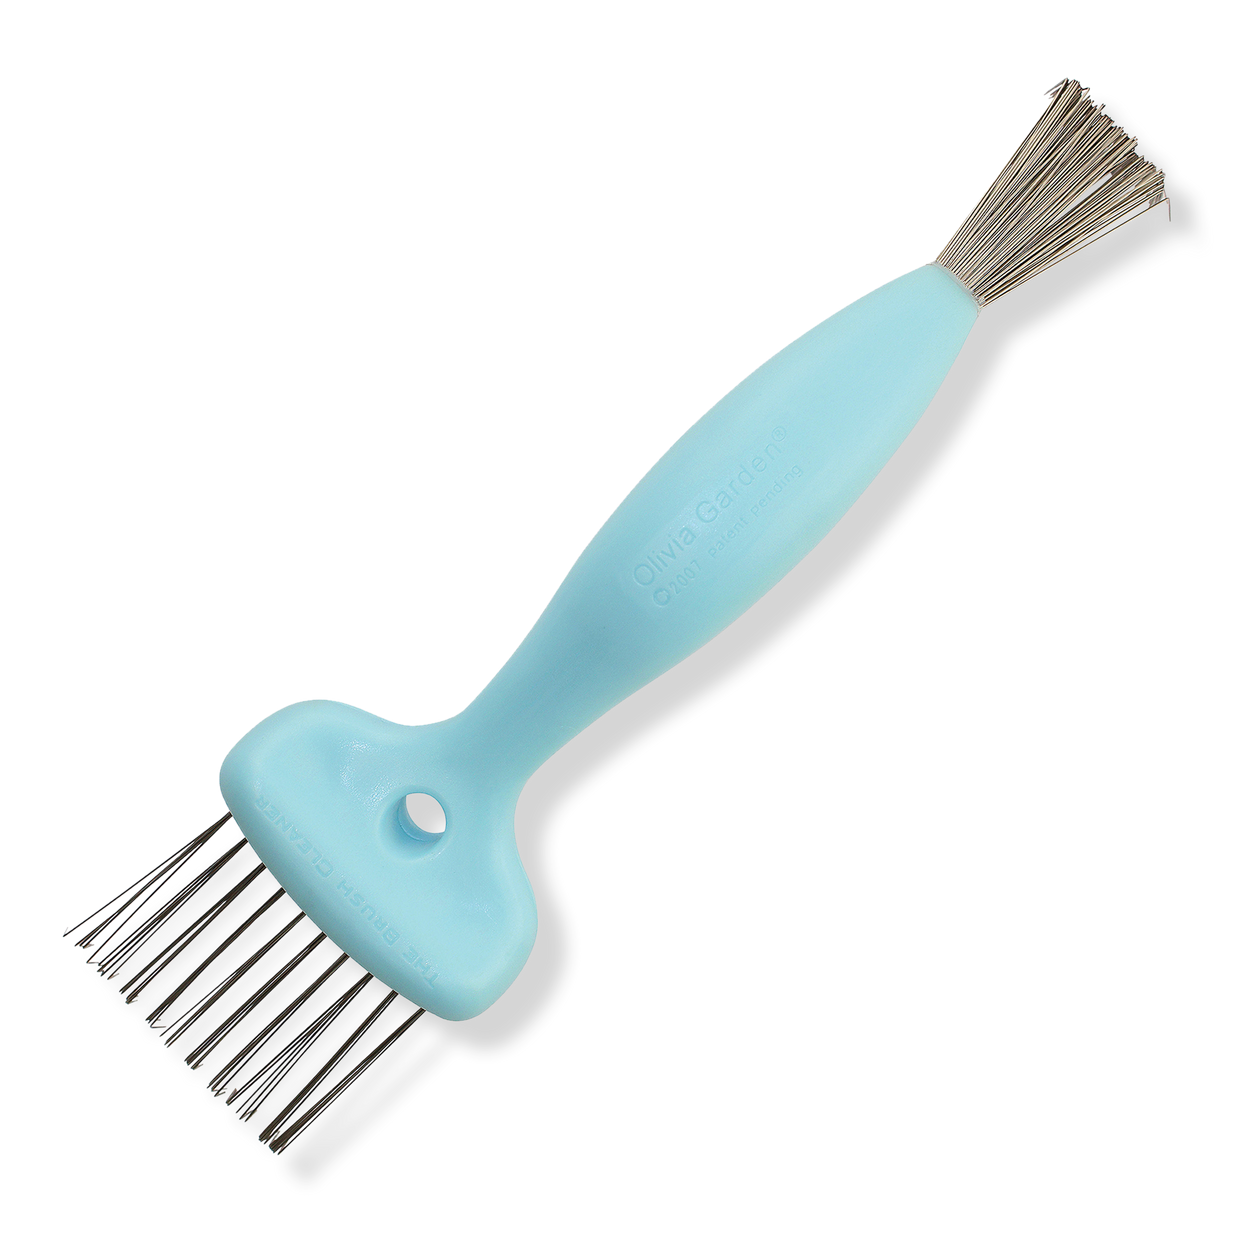 Hair Brush Cleaning Tool  😲 NEW PRODUCT ALERT 🥰 Clean your brushes with  the best tool for loose hair and also the lint and fluff brushes gather. It  rakes the hair